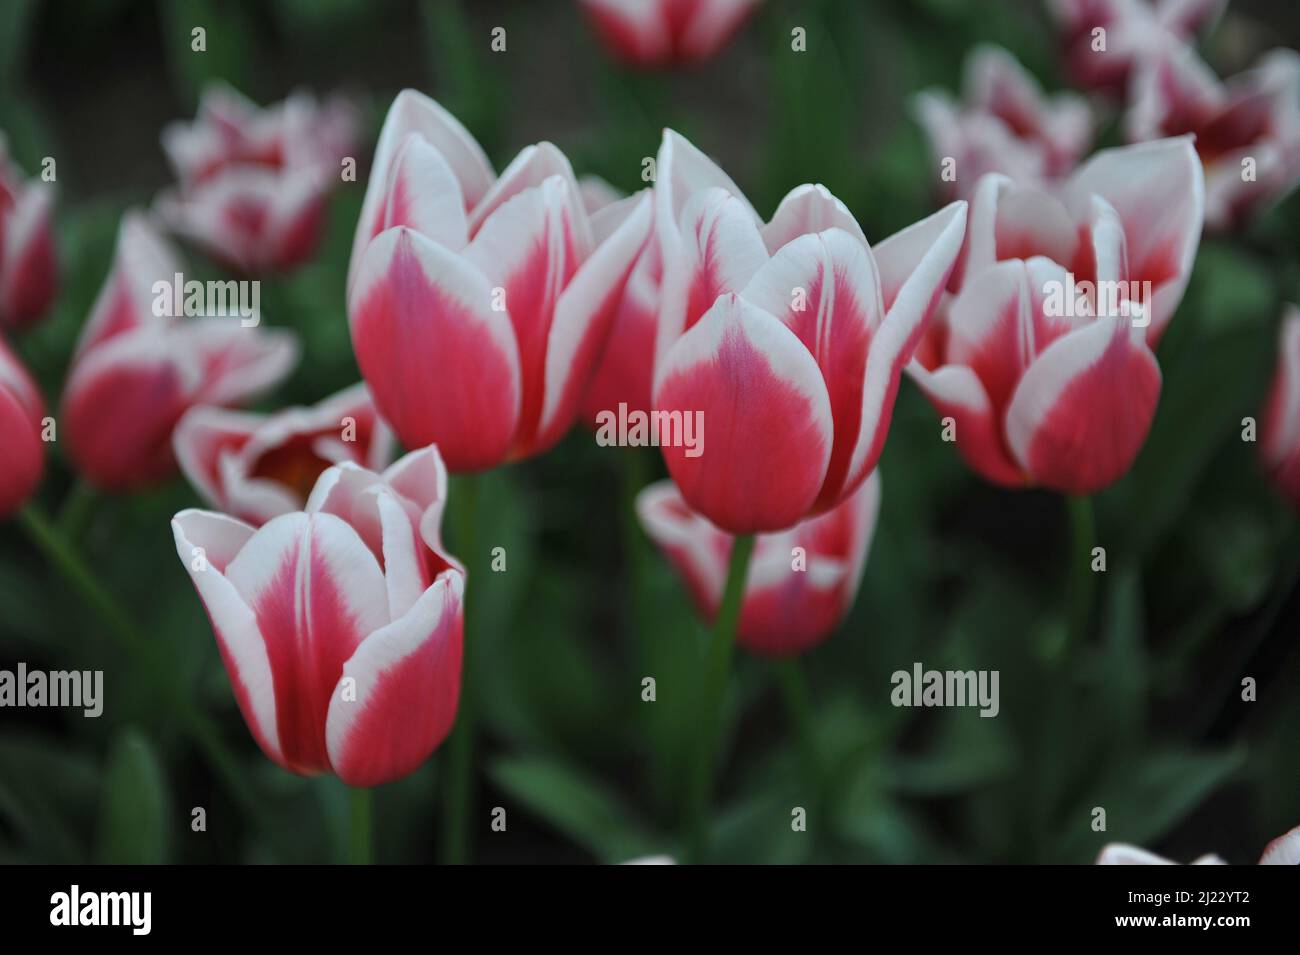 Red with white edges Triumph tulips (Tulipa) Love Potion bloom in a garden in April Stock Photo